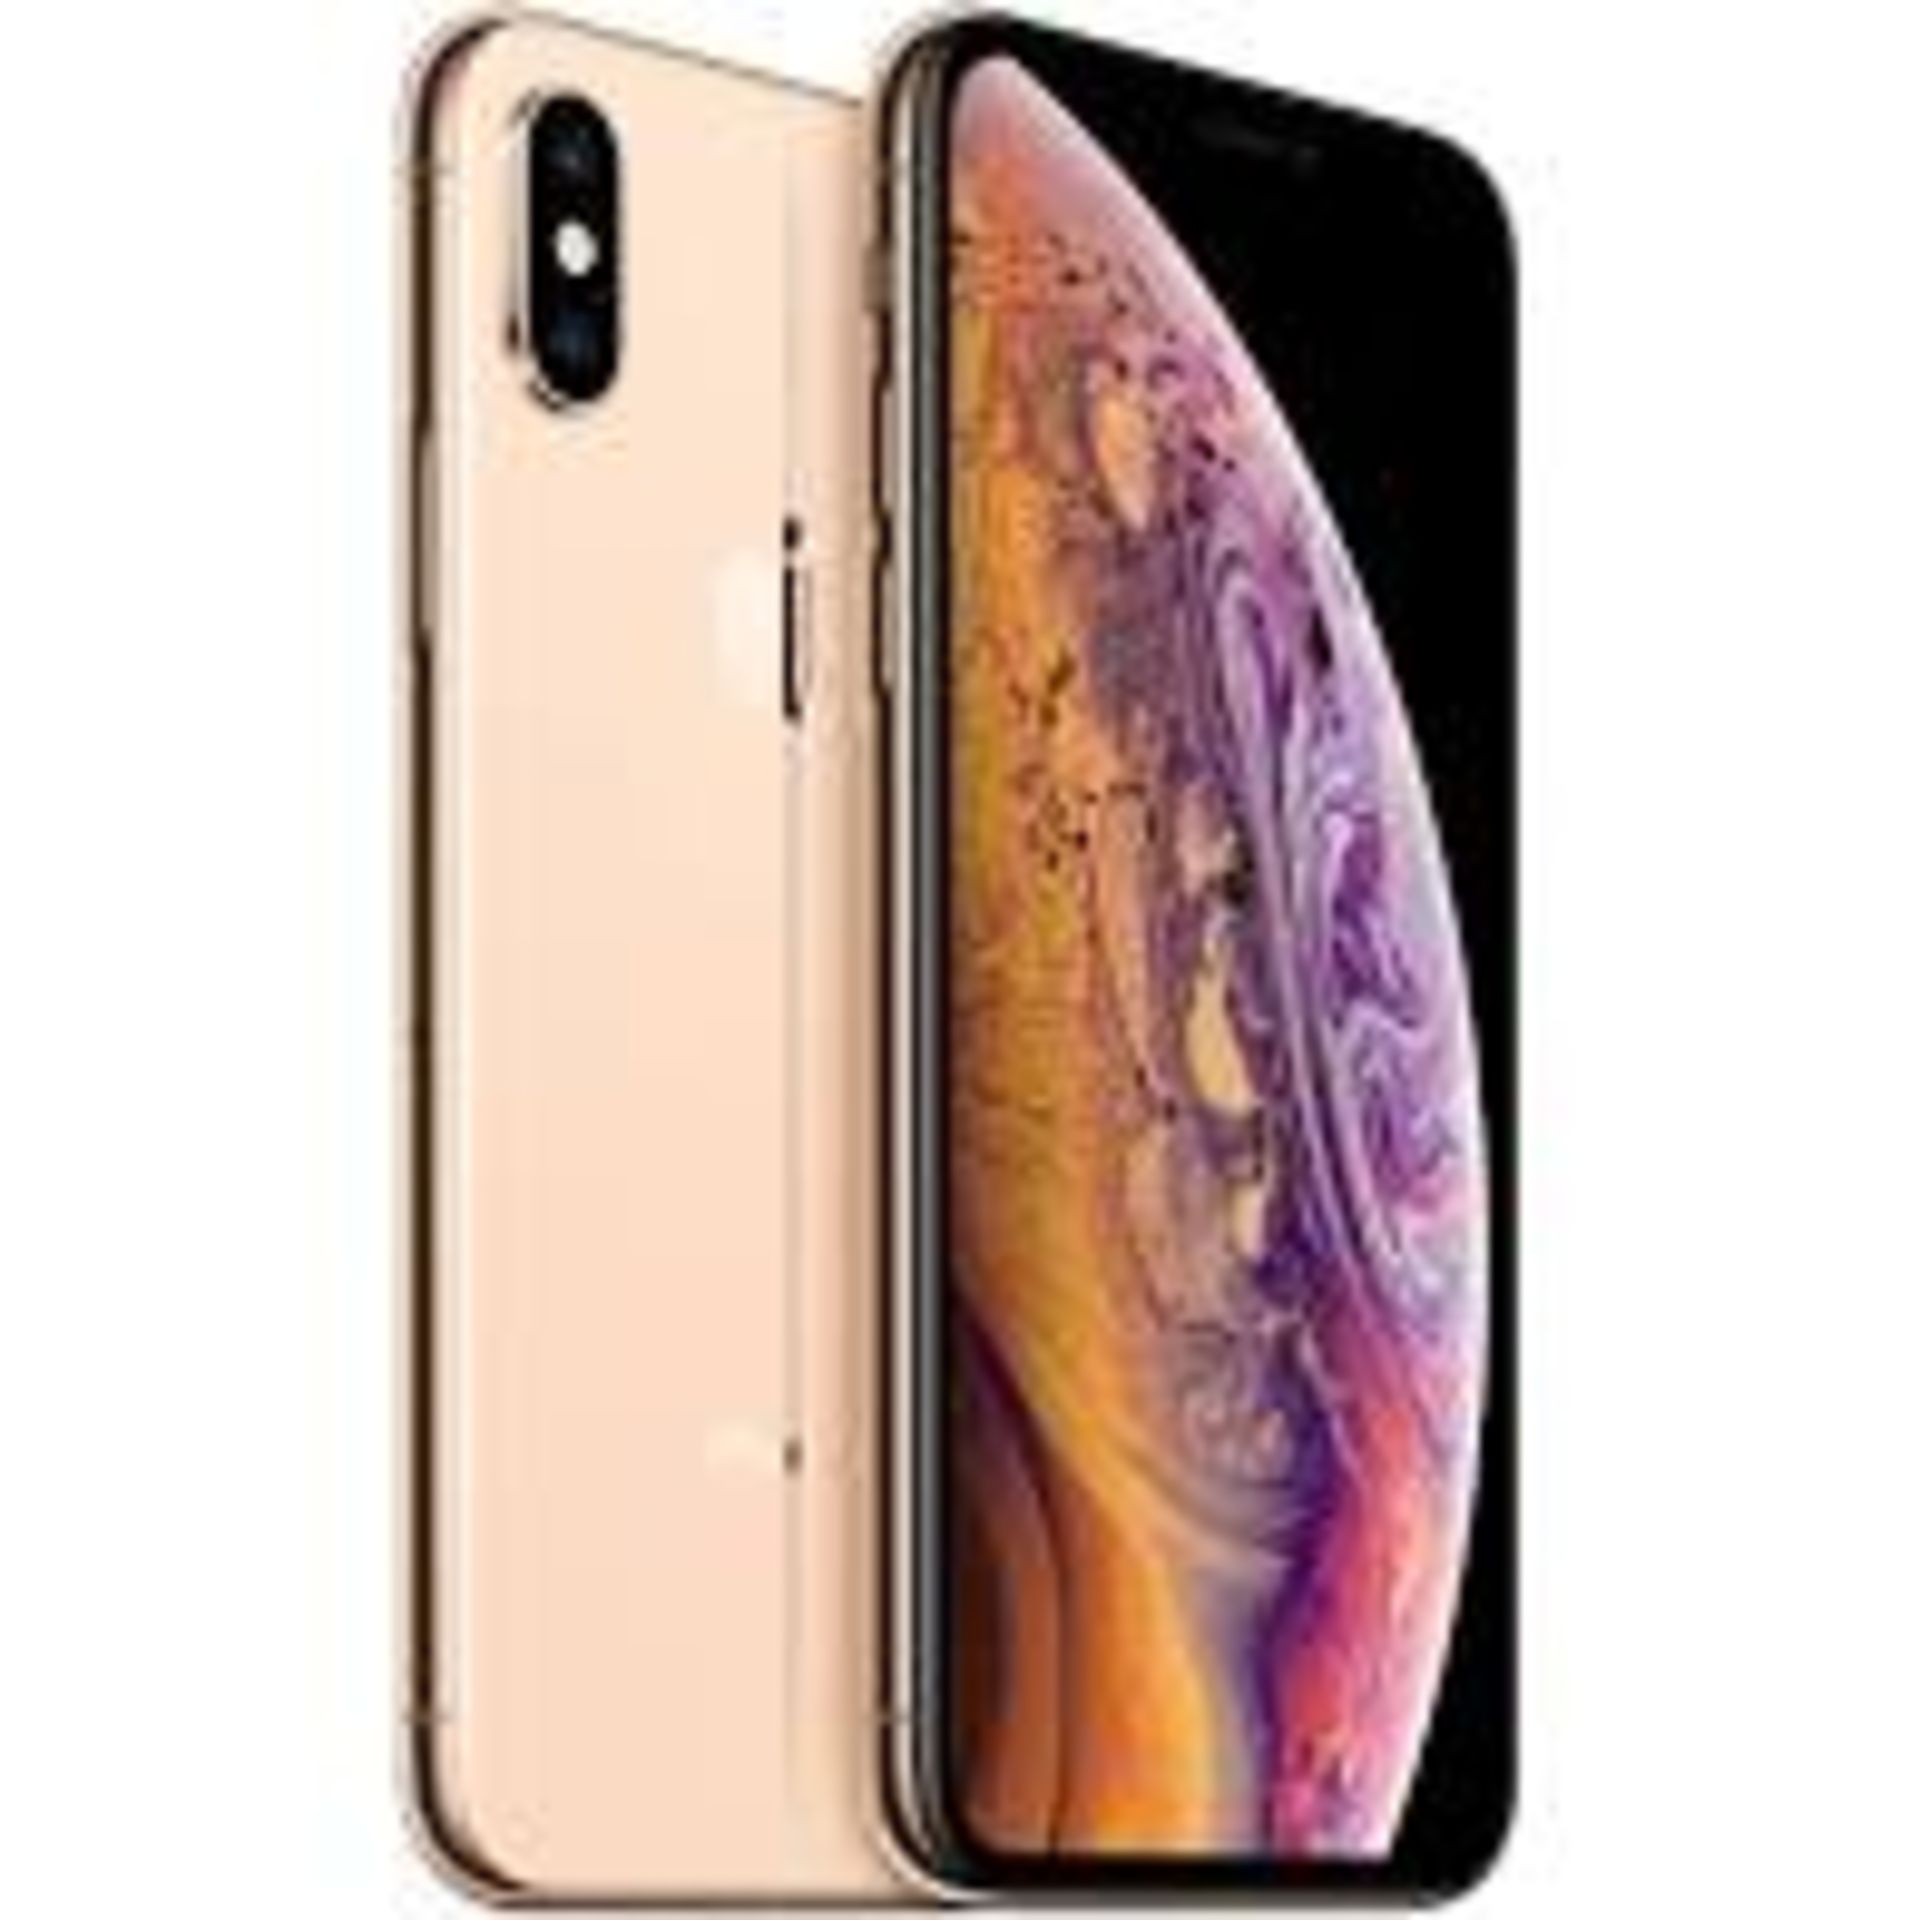 Apple iPhone Xs 256GB Gold. £1100 - Grade A - Perfect Working Condition - (Fully refurbished and